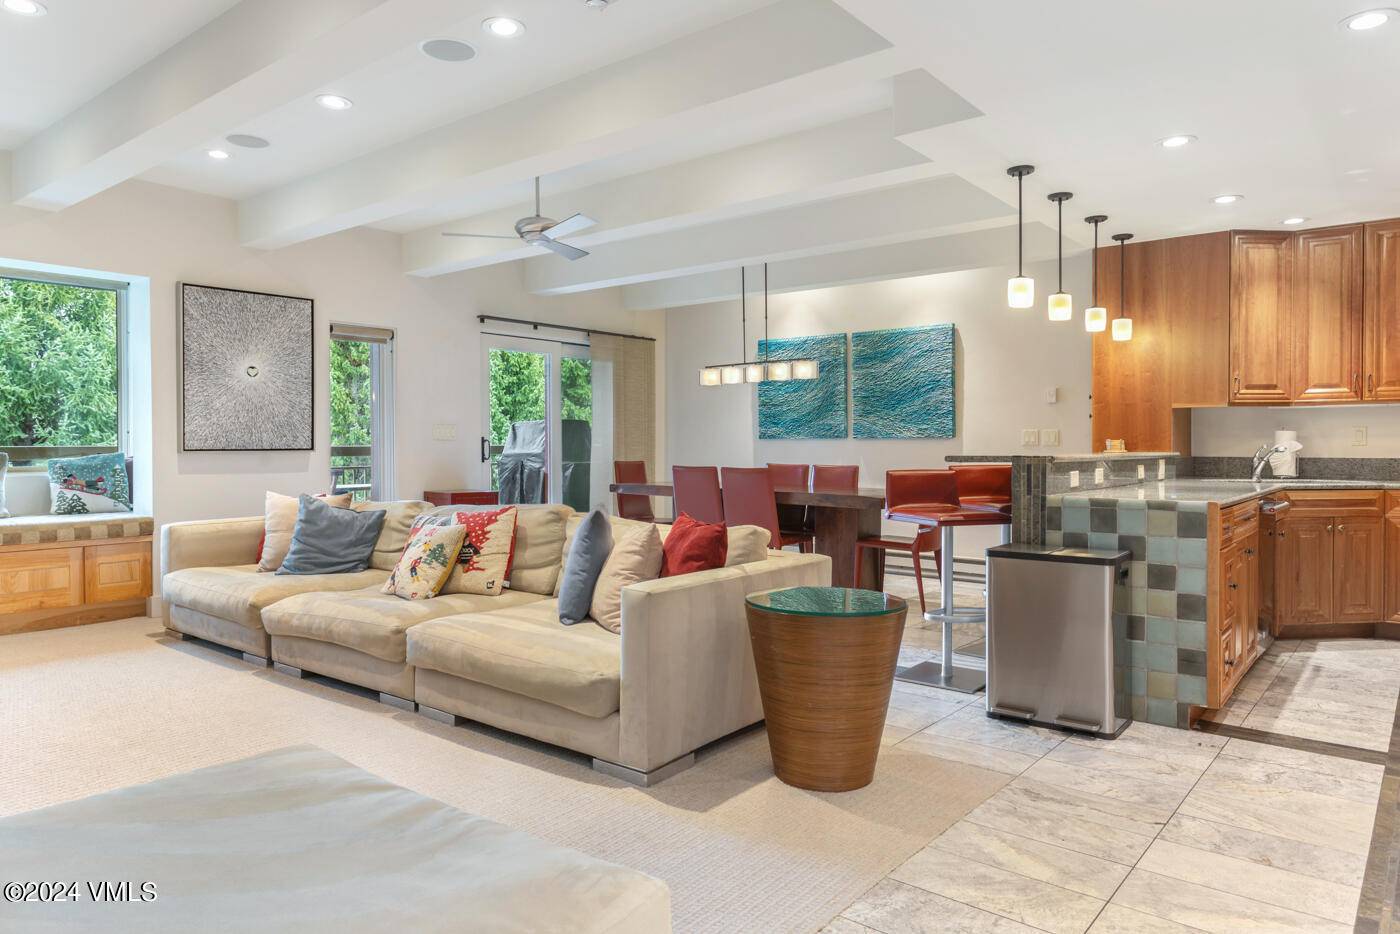 Step into luxury living in the heart of Lionshead with this upgraded and perfectly maintained listing that boasts an unbeatable location near all that the Vail Core has to offer.